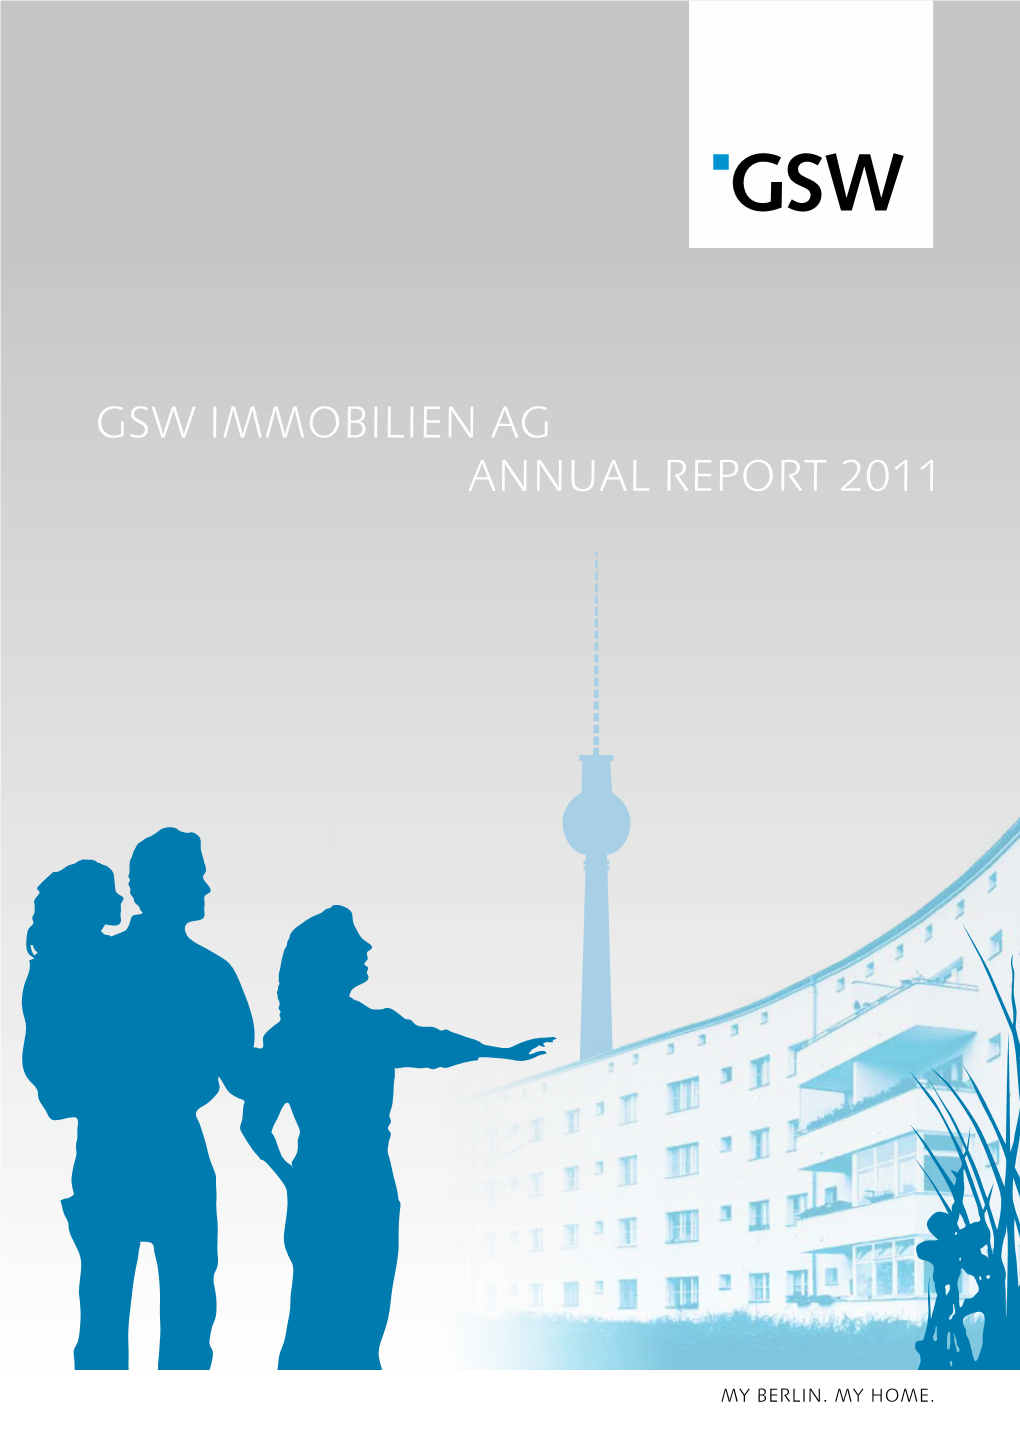 Annual Report 2011 GSW Immobilien AG